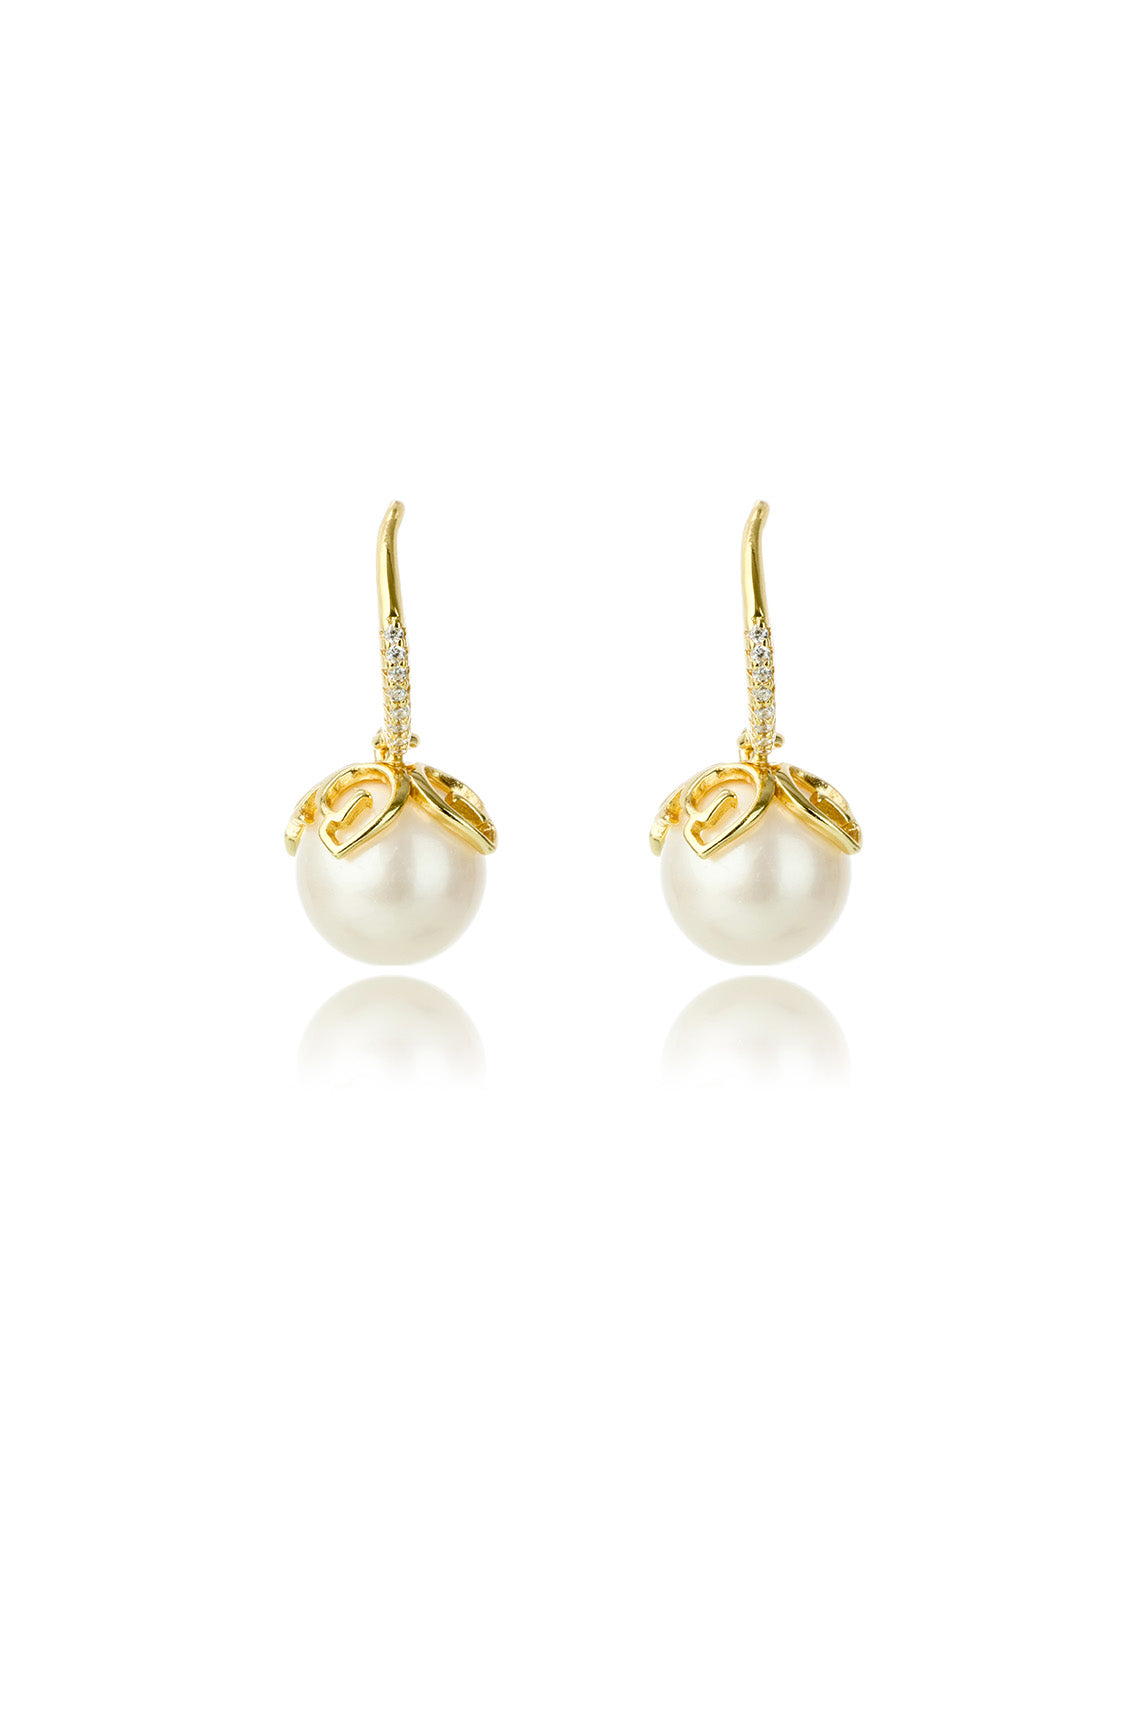 OCEANS PALM COVE FRESHWATER PEARL EARRINGS GOLD